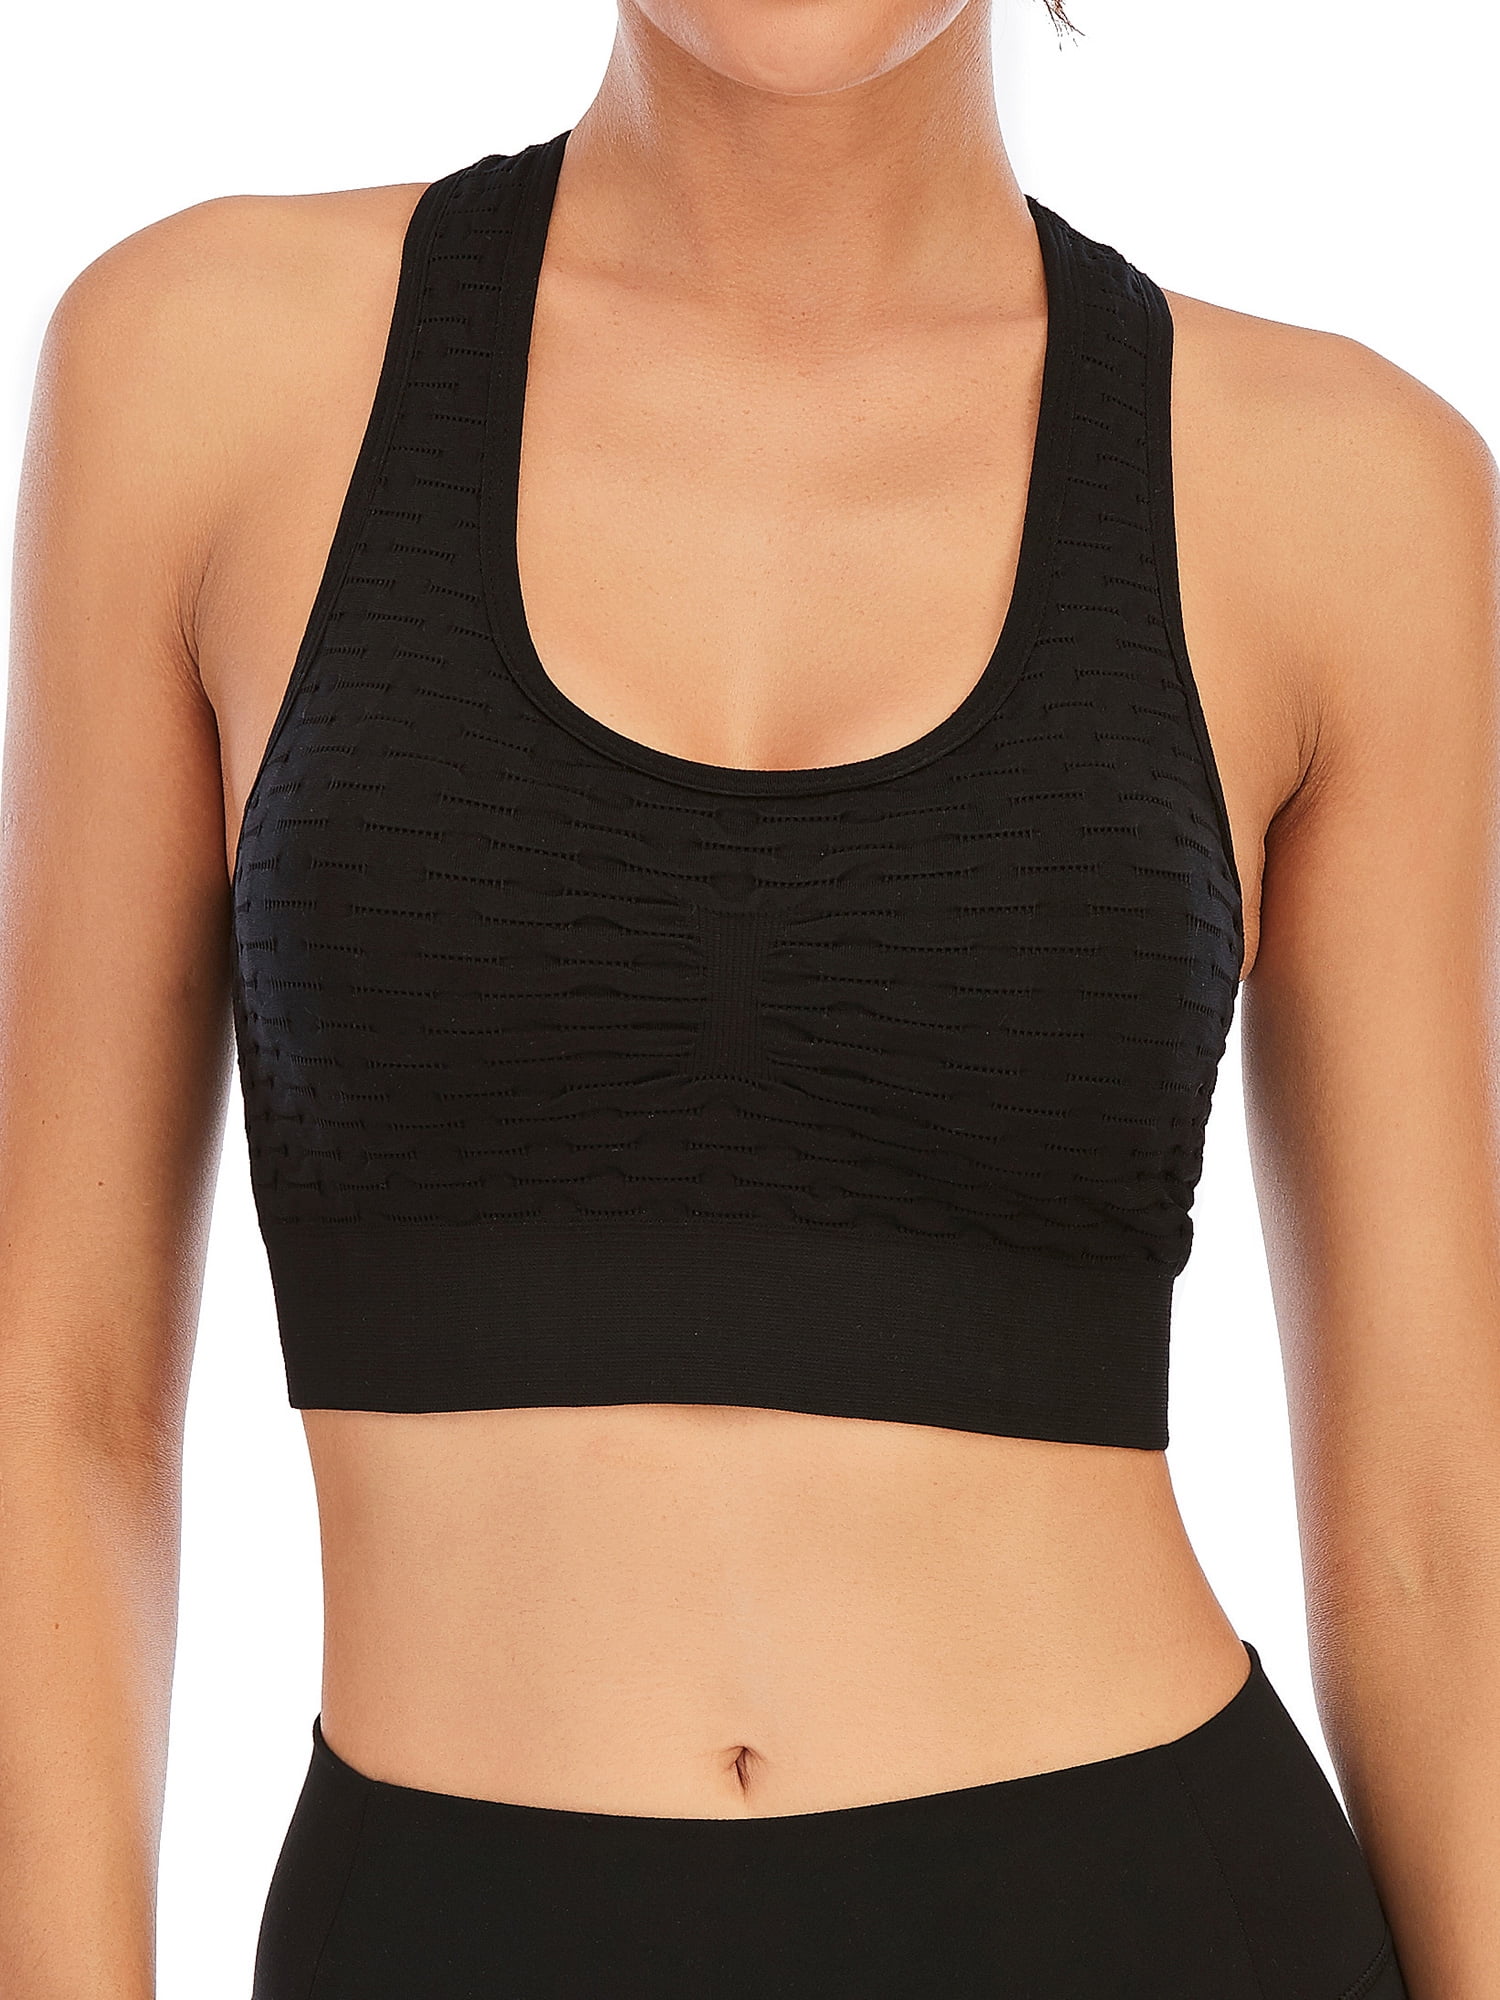 Womens Racerback Seamless Sports Bra with Back Open Holes Padded Workout Bra Tops